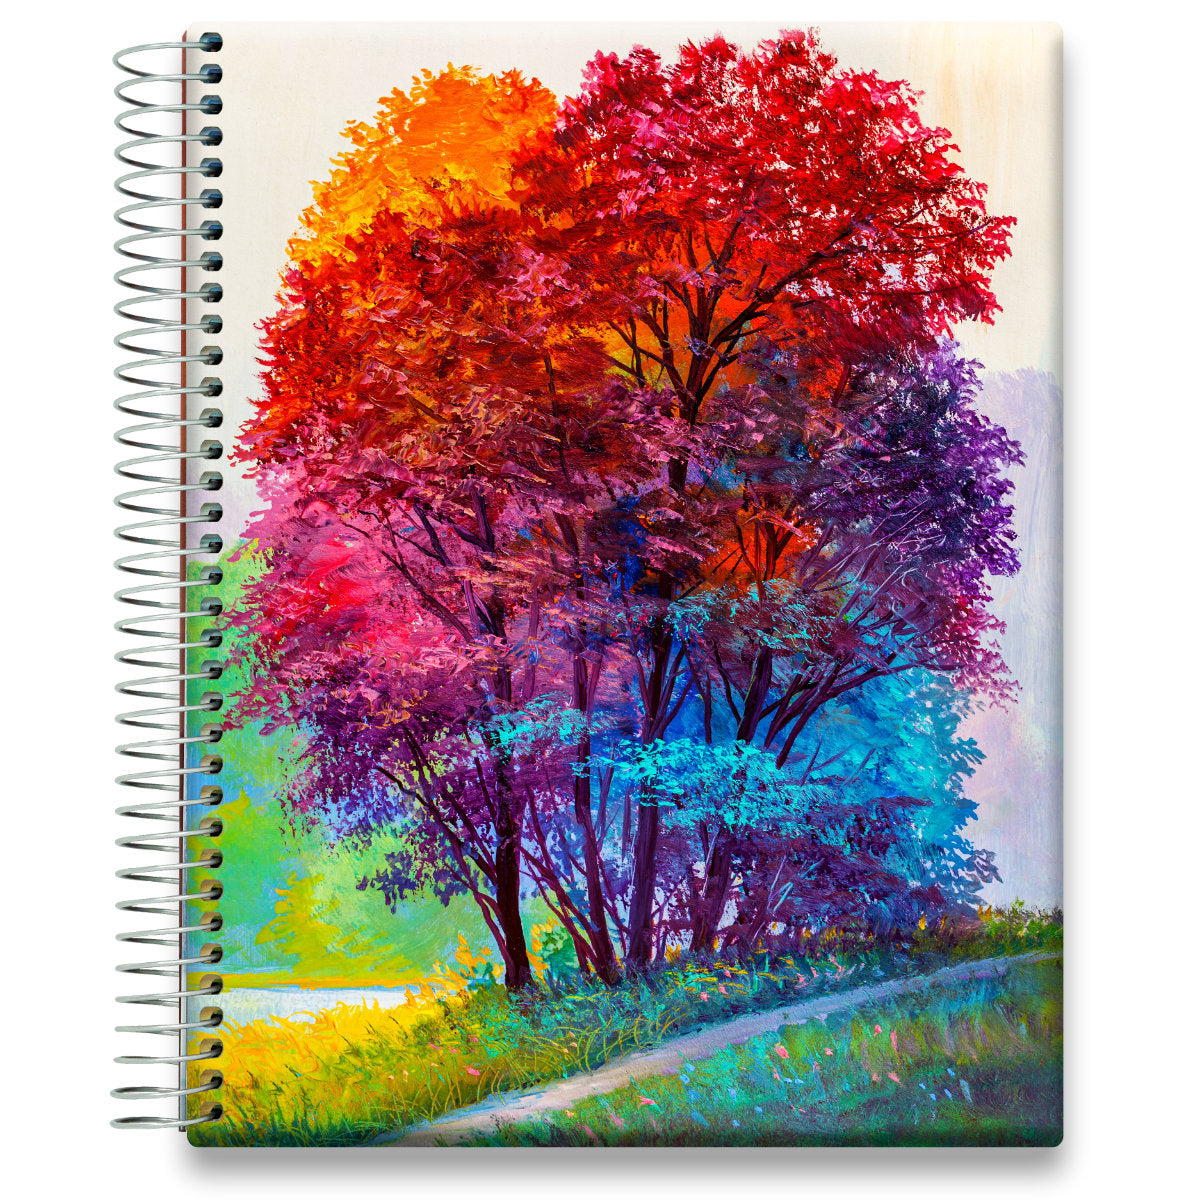 Coaching Session + Oct 2024 to Dec 2025 Planner - Oil Painting Forest